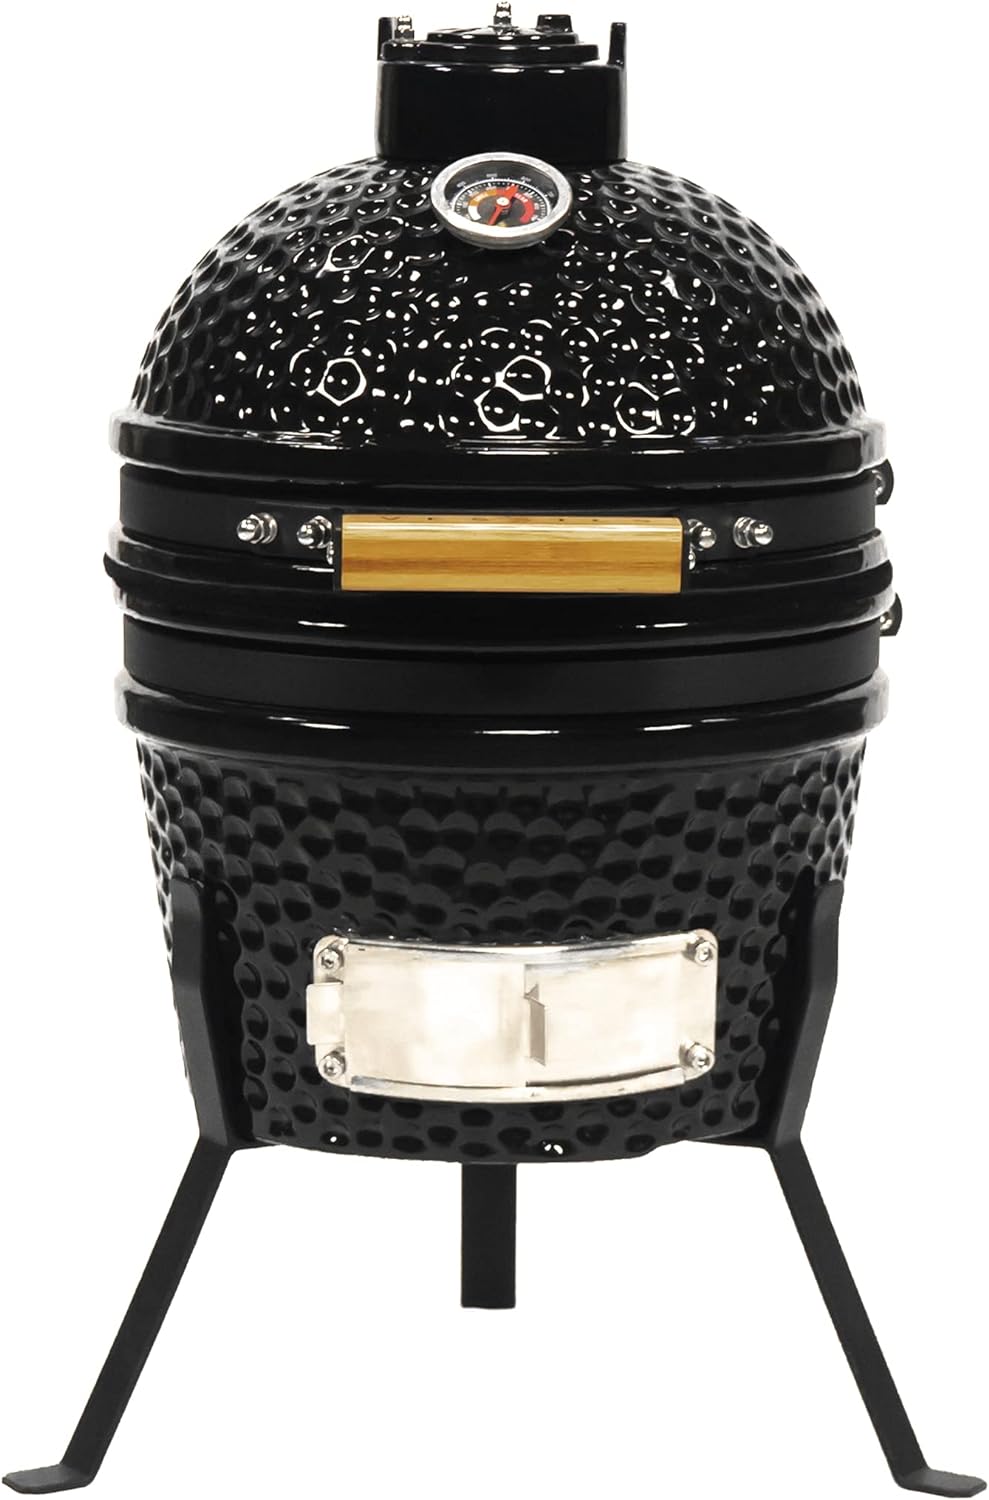 VESSILS Kamado Charcoal BBQ Grill Review